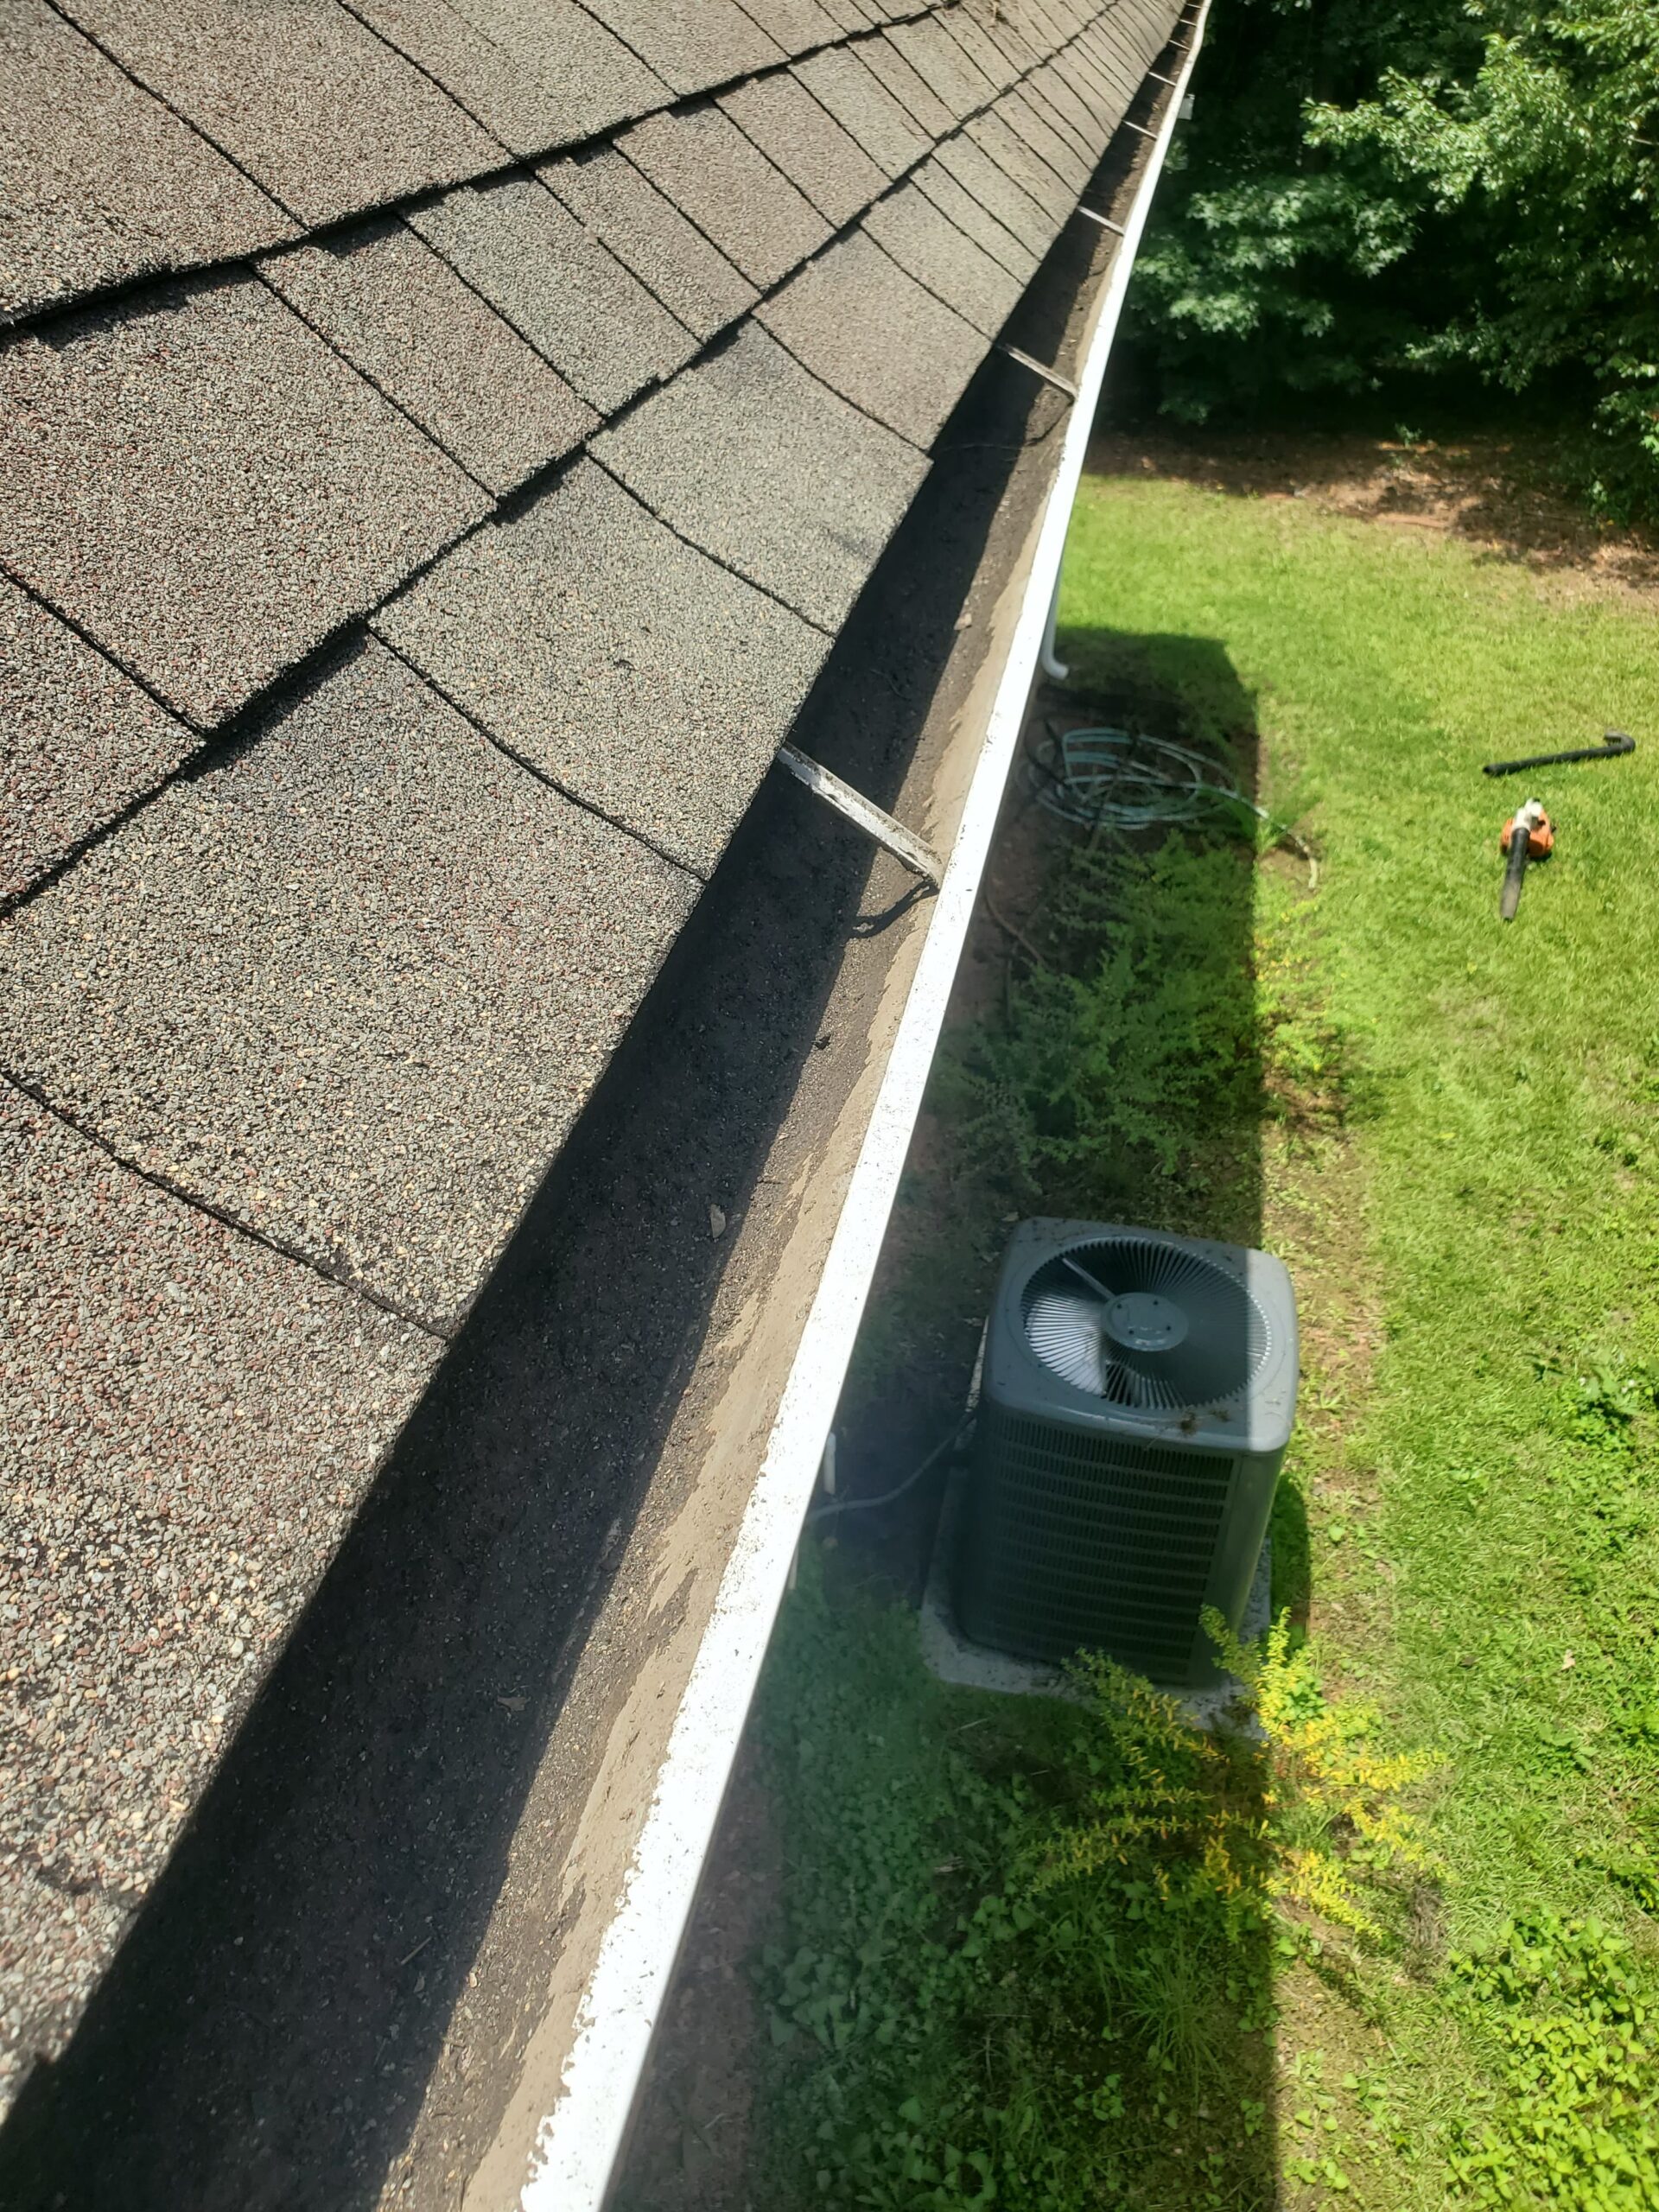 Heffernan's Home Services Gutter Cleaning Service Near Me Indianapolis In